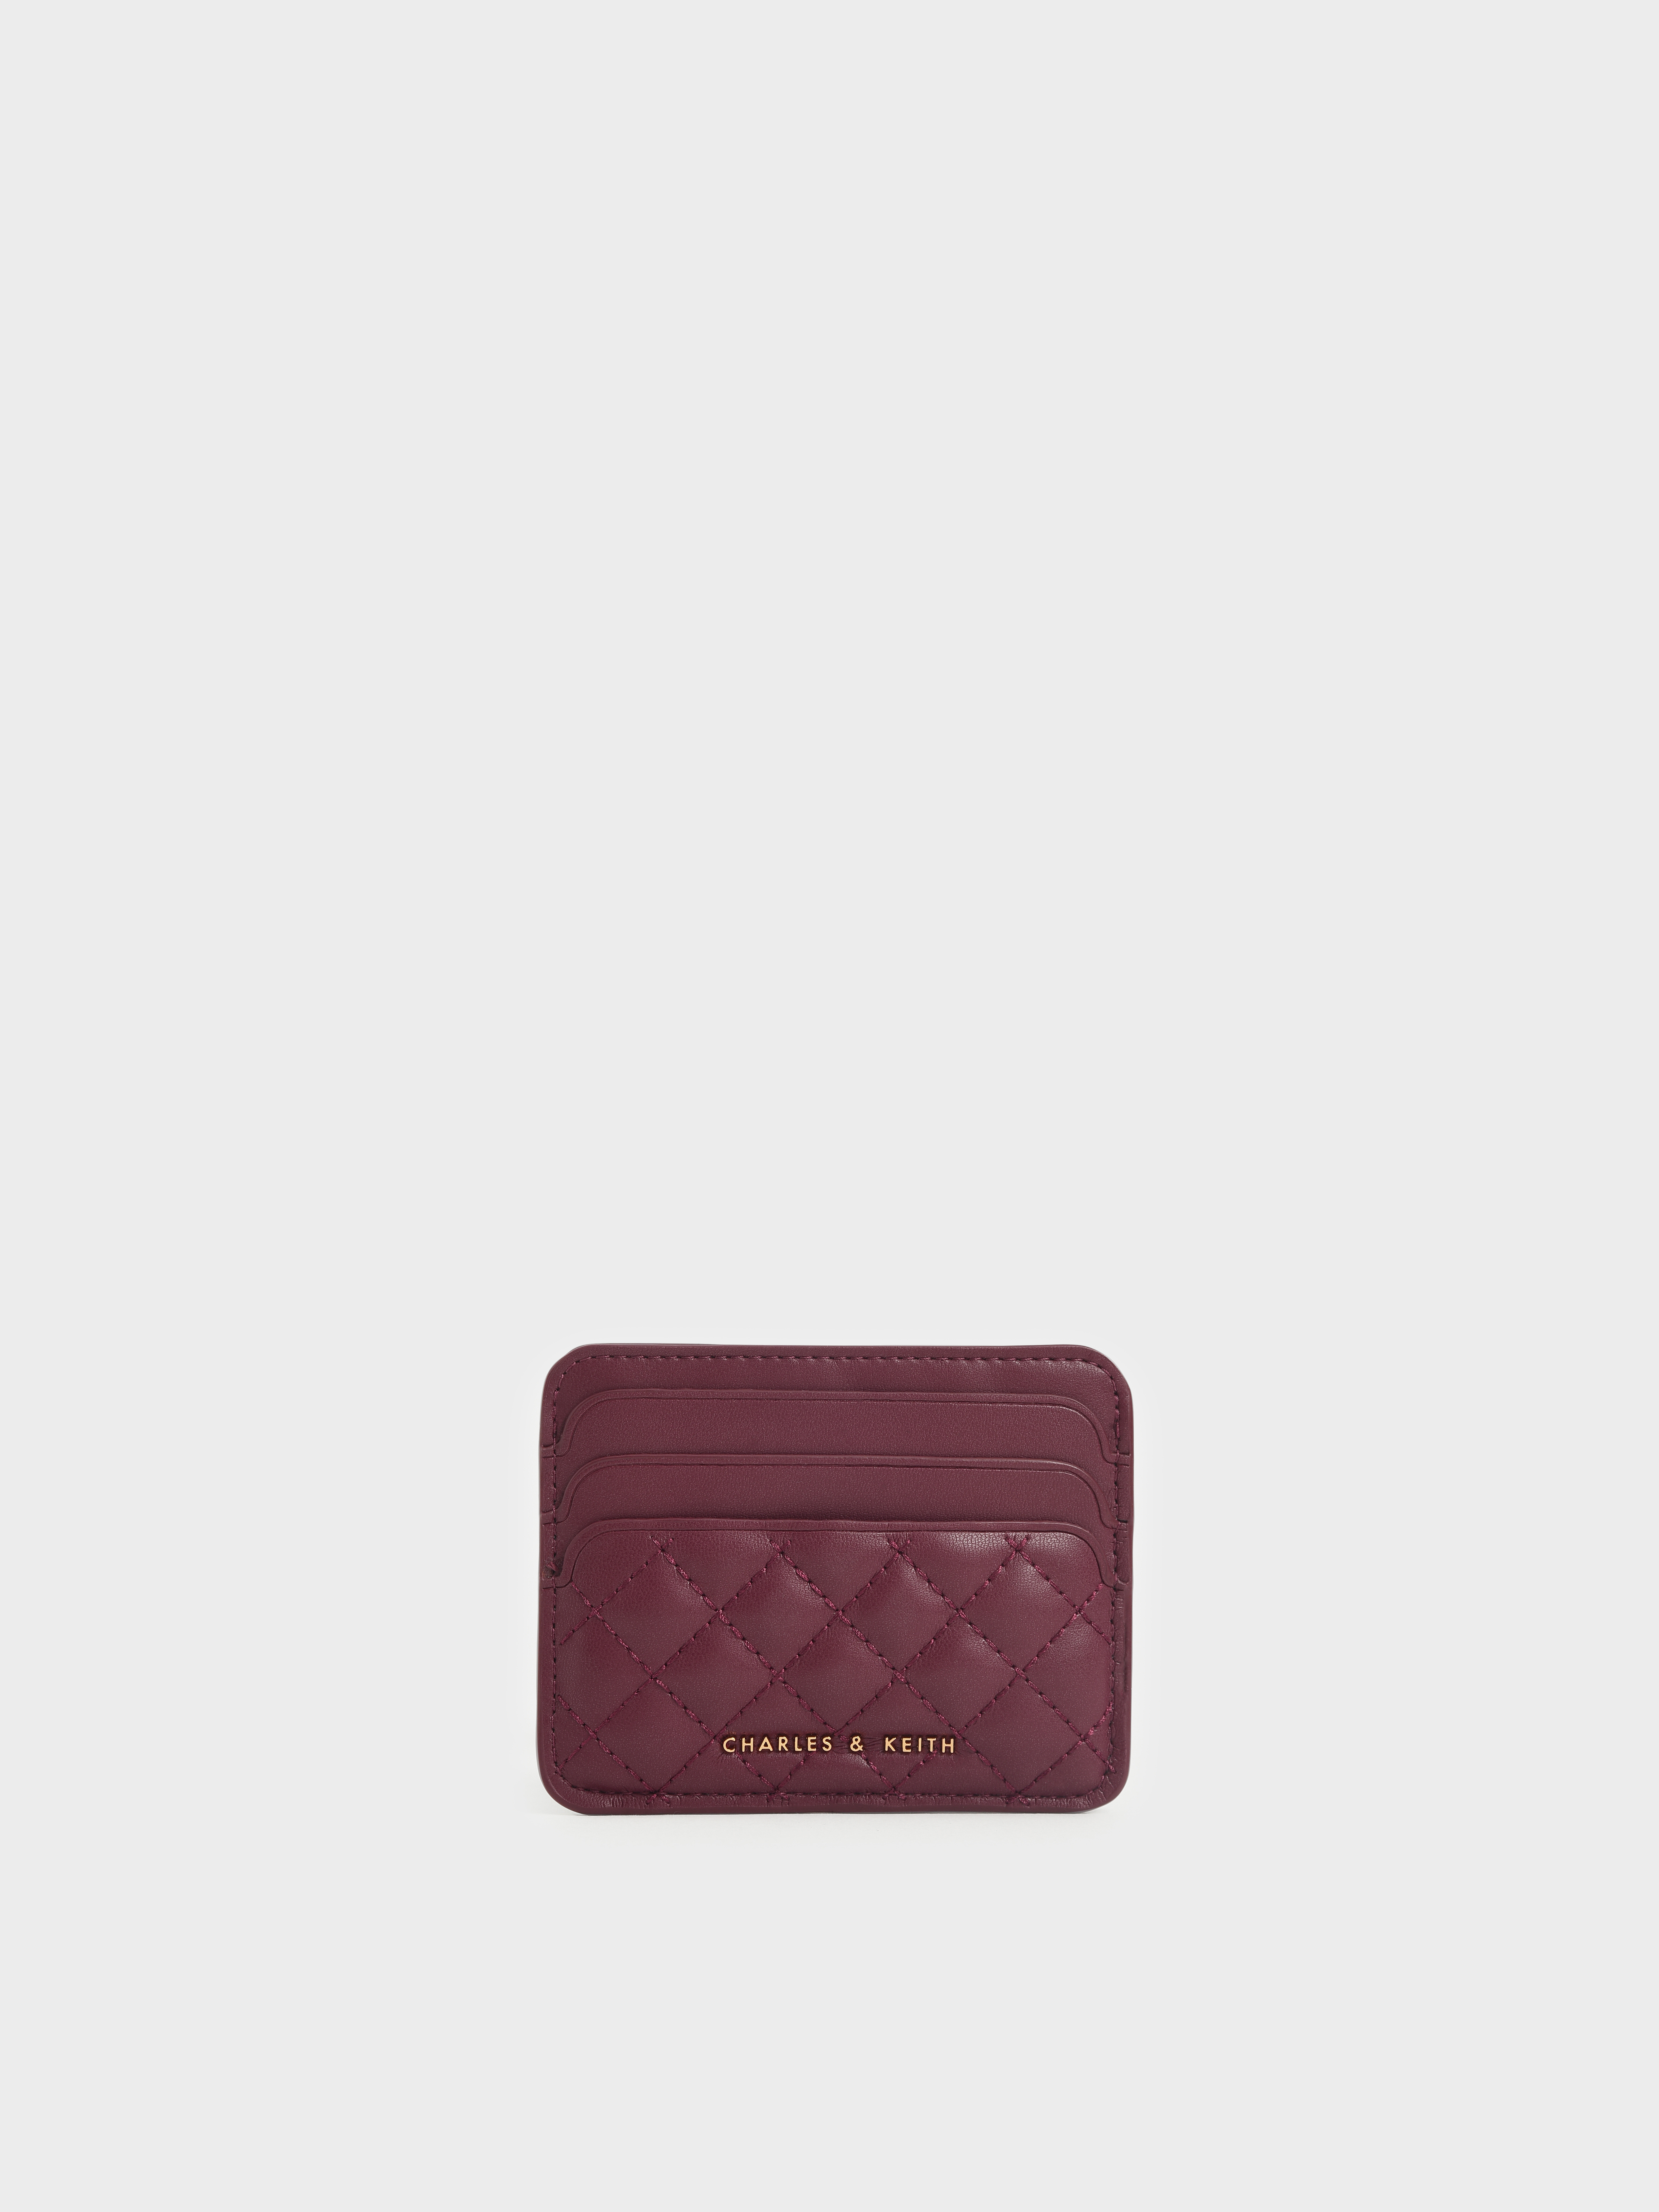 Charles & Keith card holder bag in purple with gold chain strap